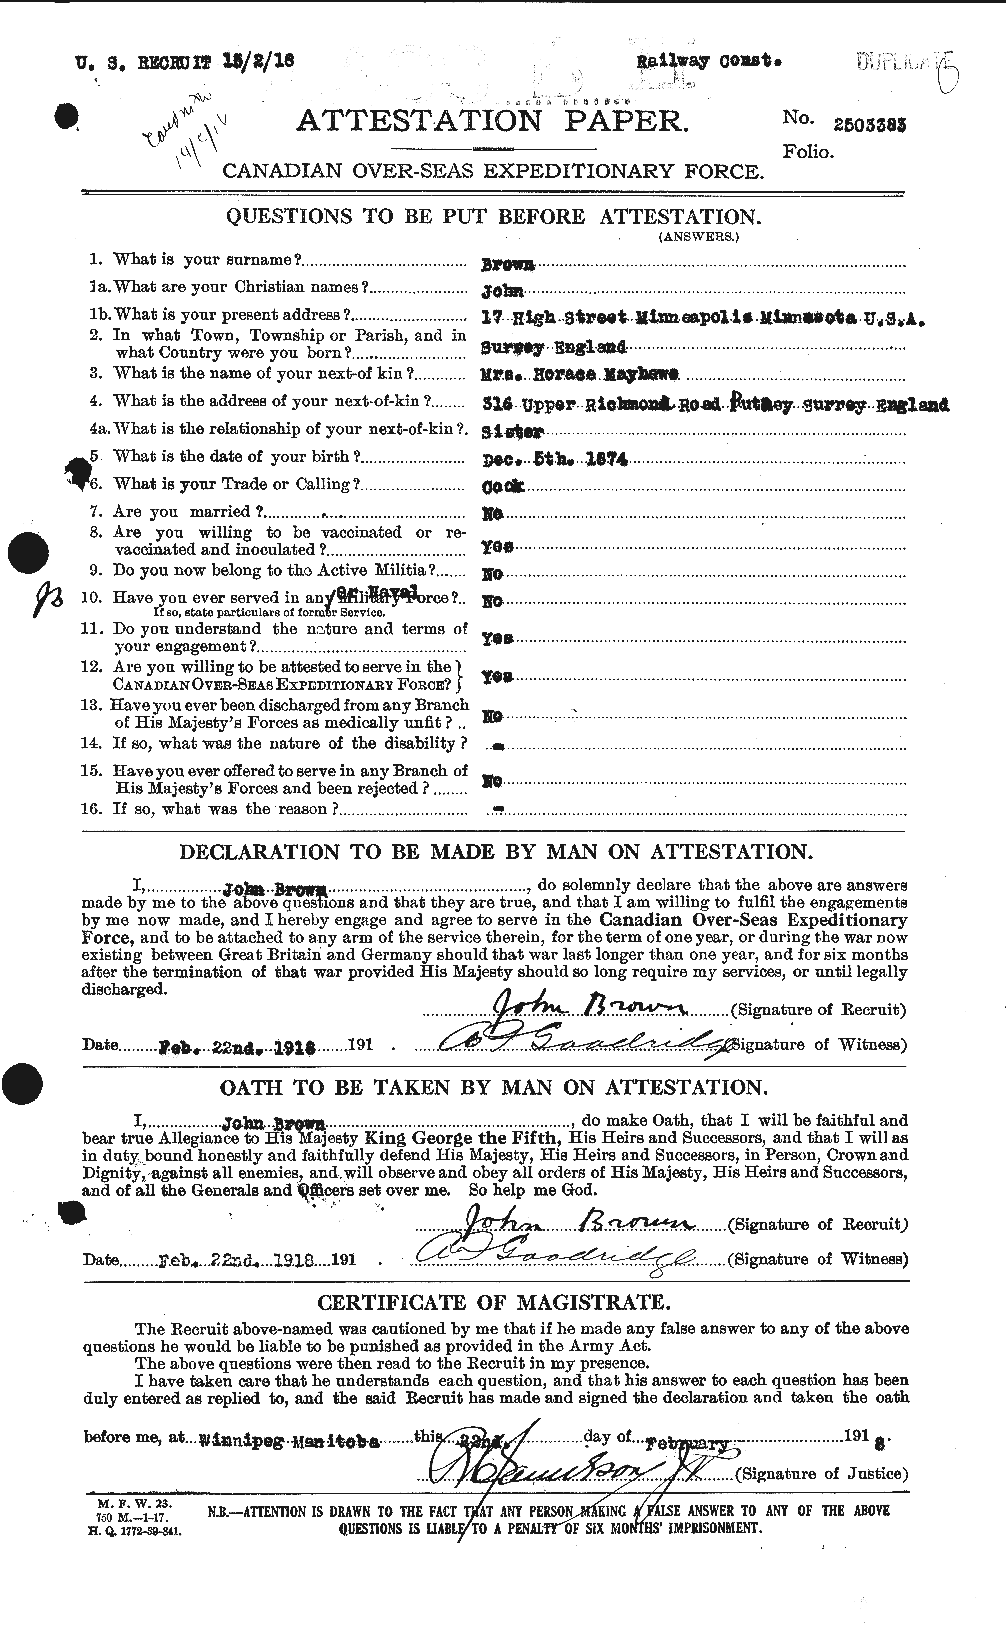 Personnel Records of the First World War - CEF 263924a